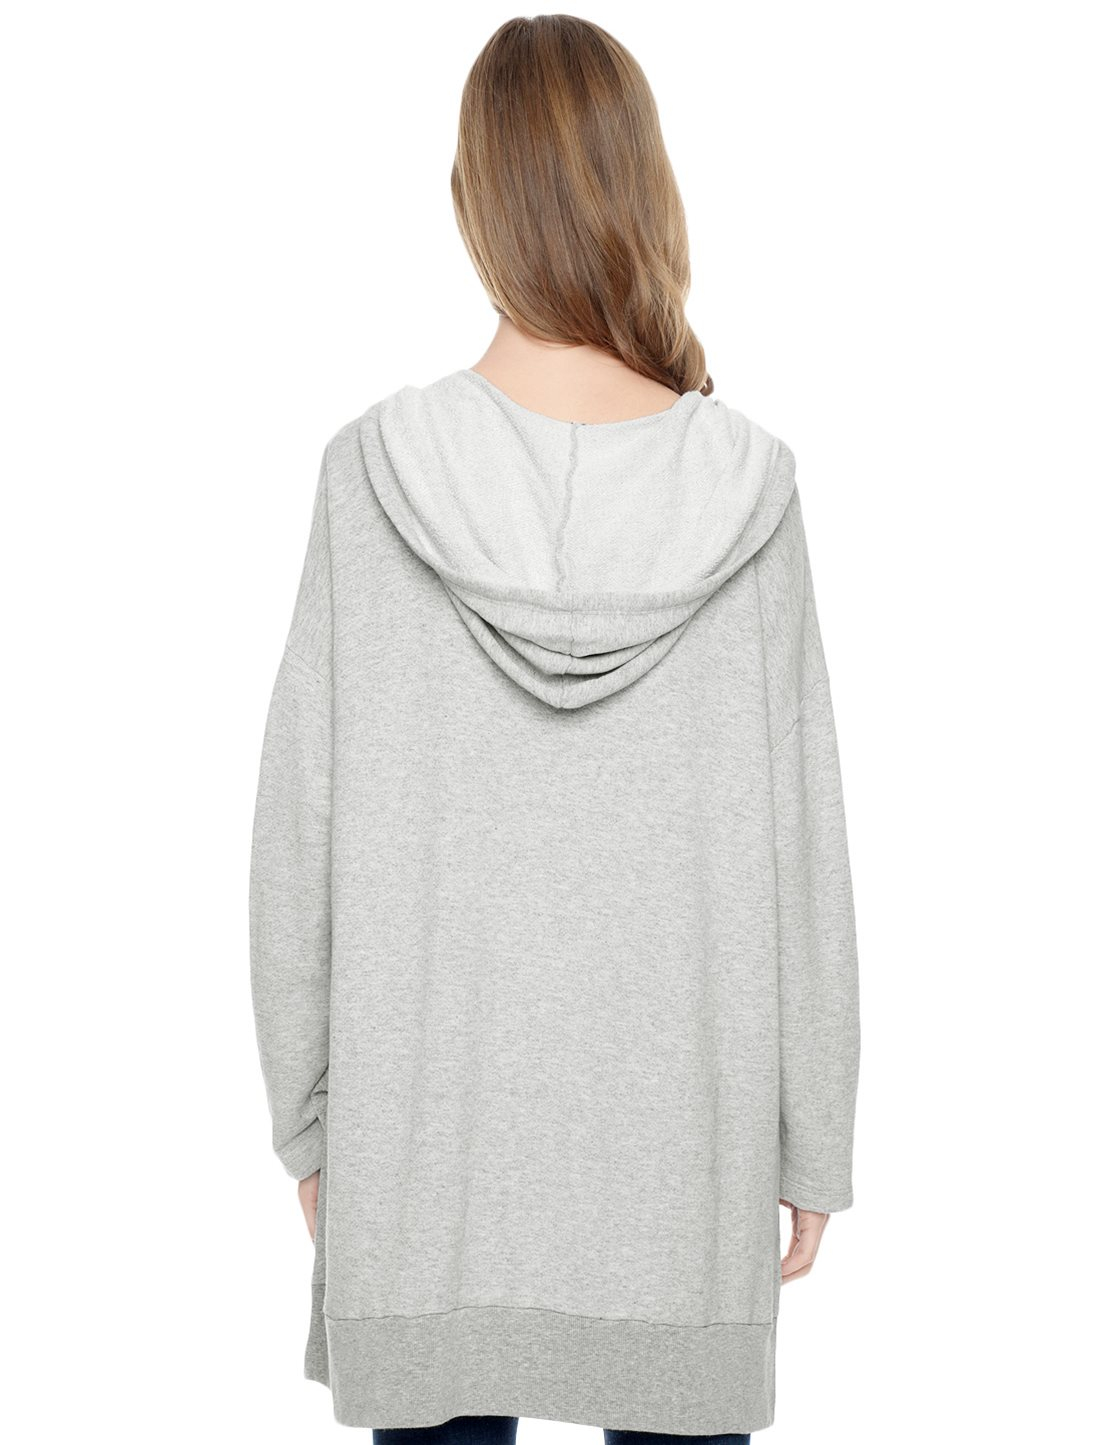 Splendid French Terry Boxy Hoodie in Gray (Heather Grey) | Lyst